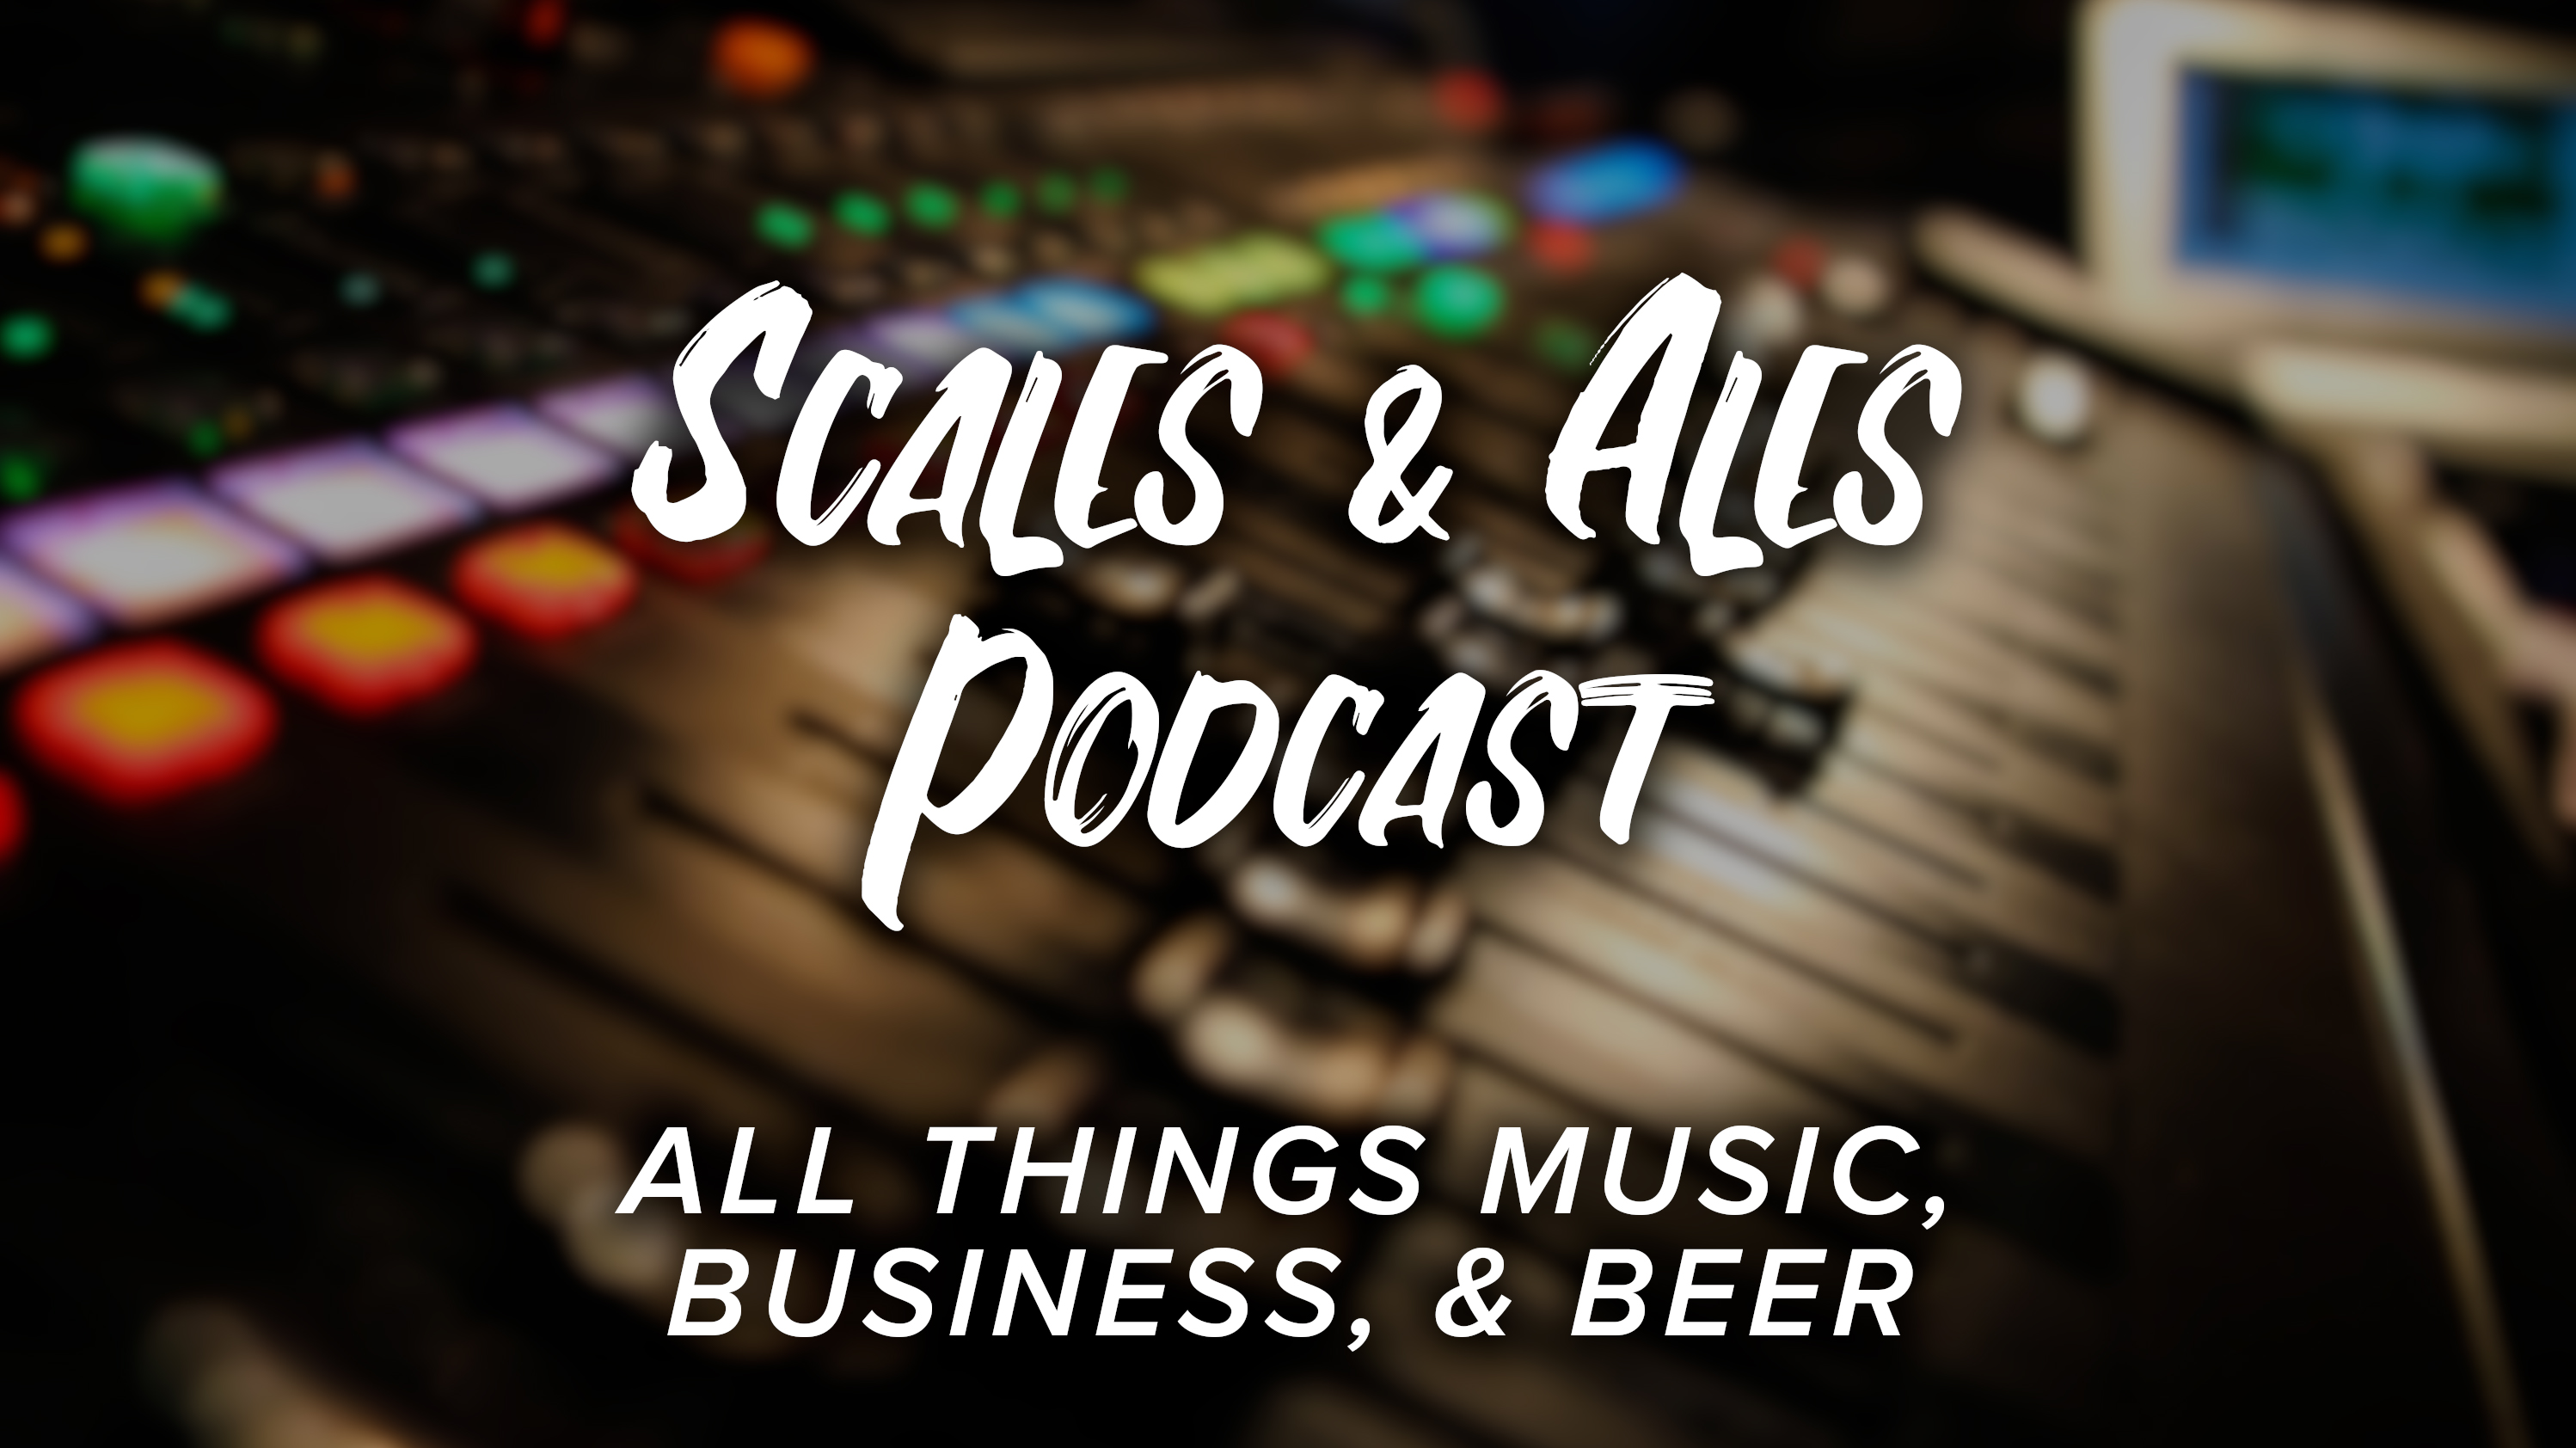 Scales & Ales Tulsa Podcast Tulsa Concerts Music, Business, & Beer